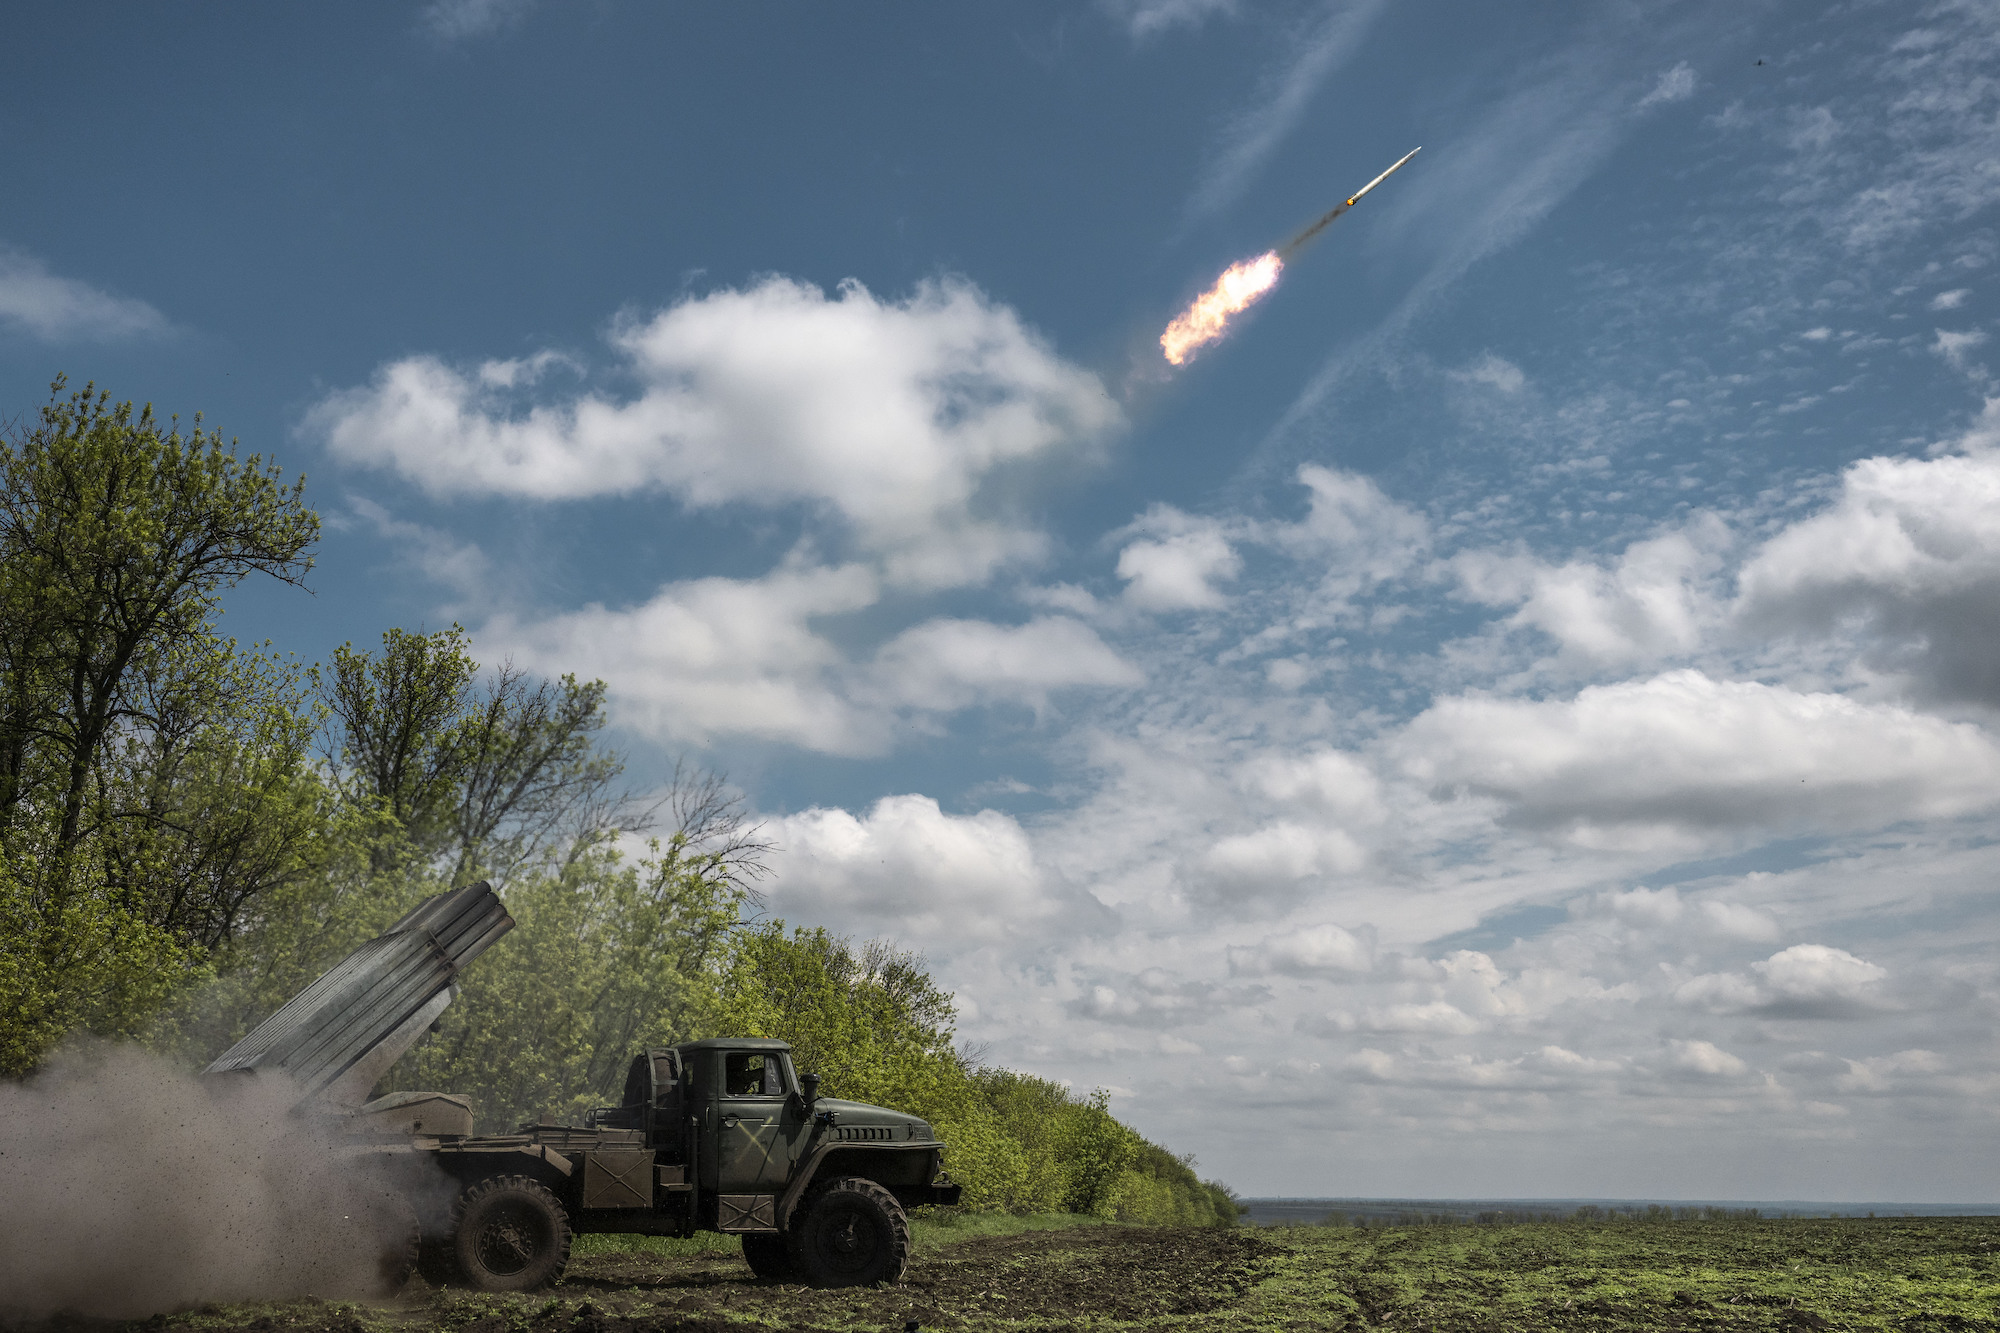 Ukrainian artillery rocket units fire towards the trenches of Russian forces in Donetsk on Tuesday.